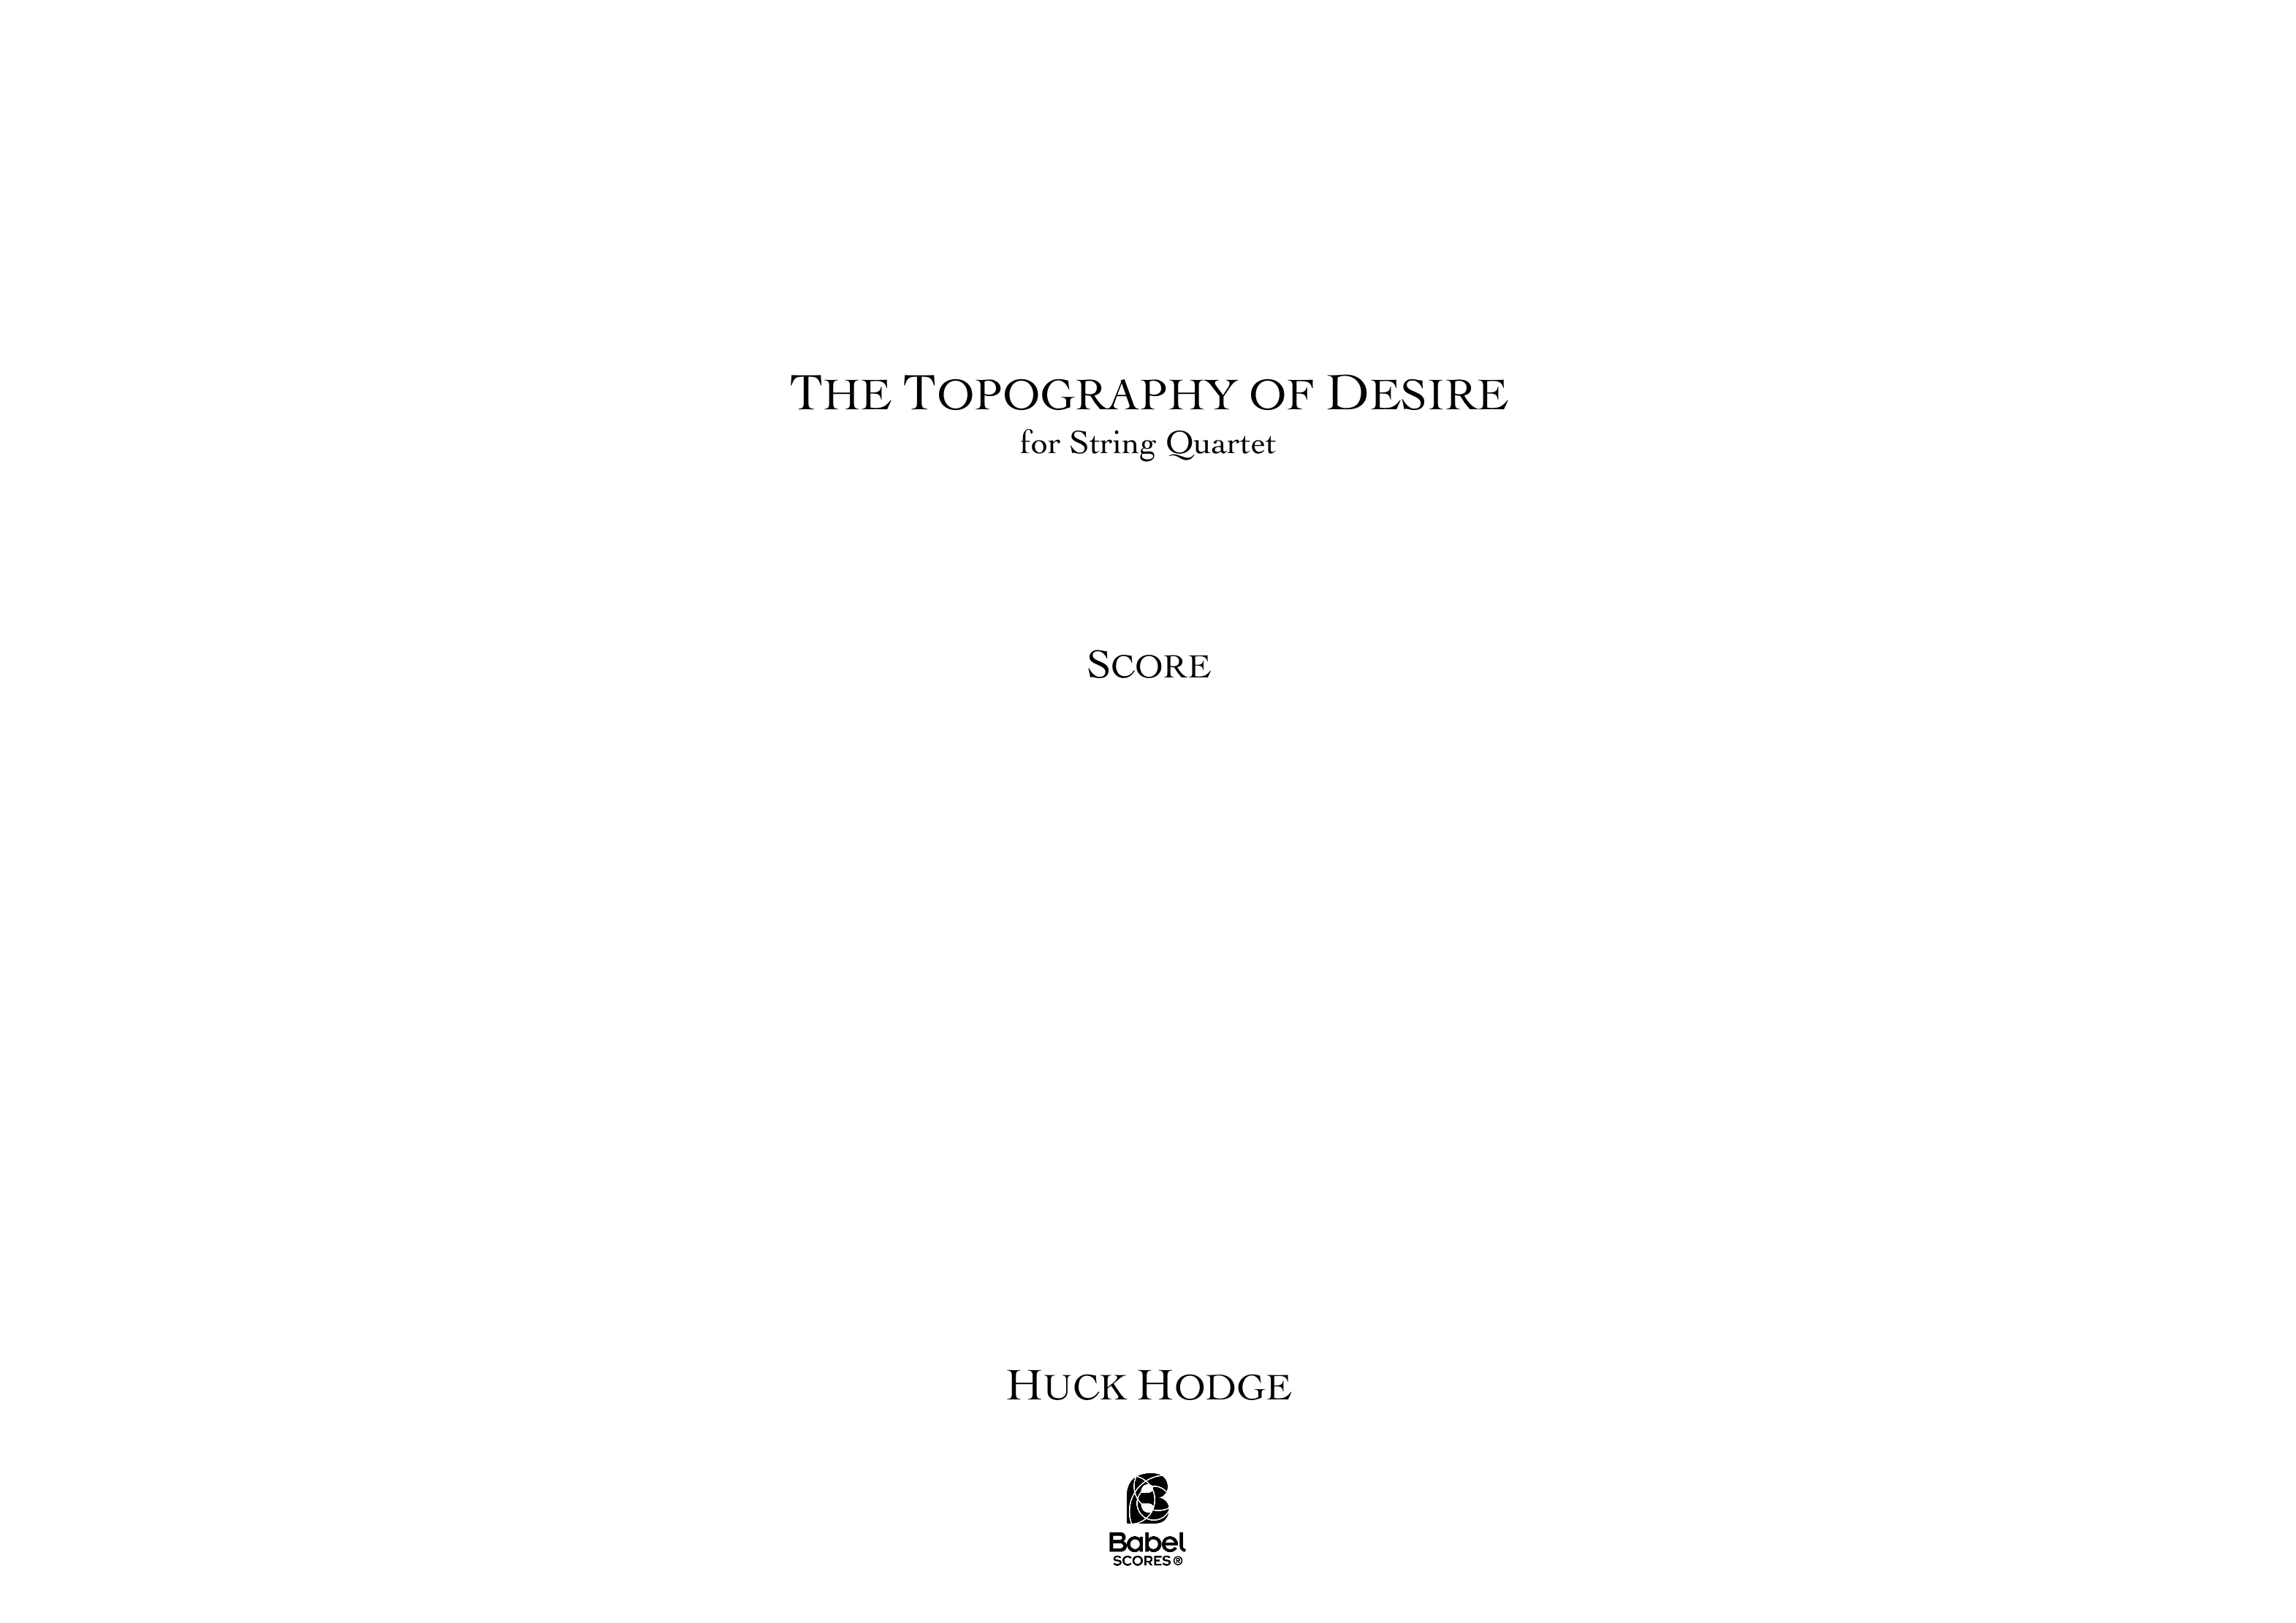 The Topography of Desire A3 z 3 1 594